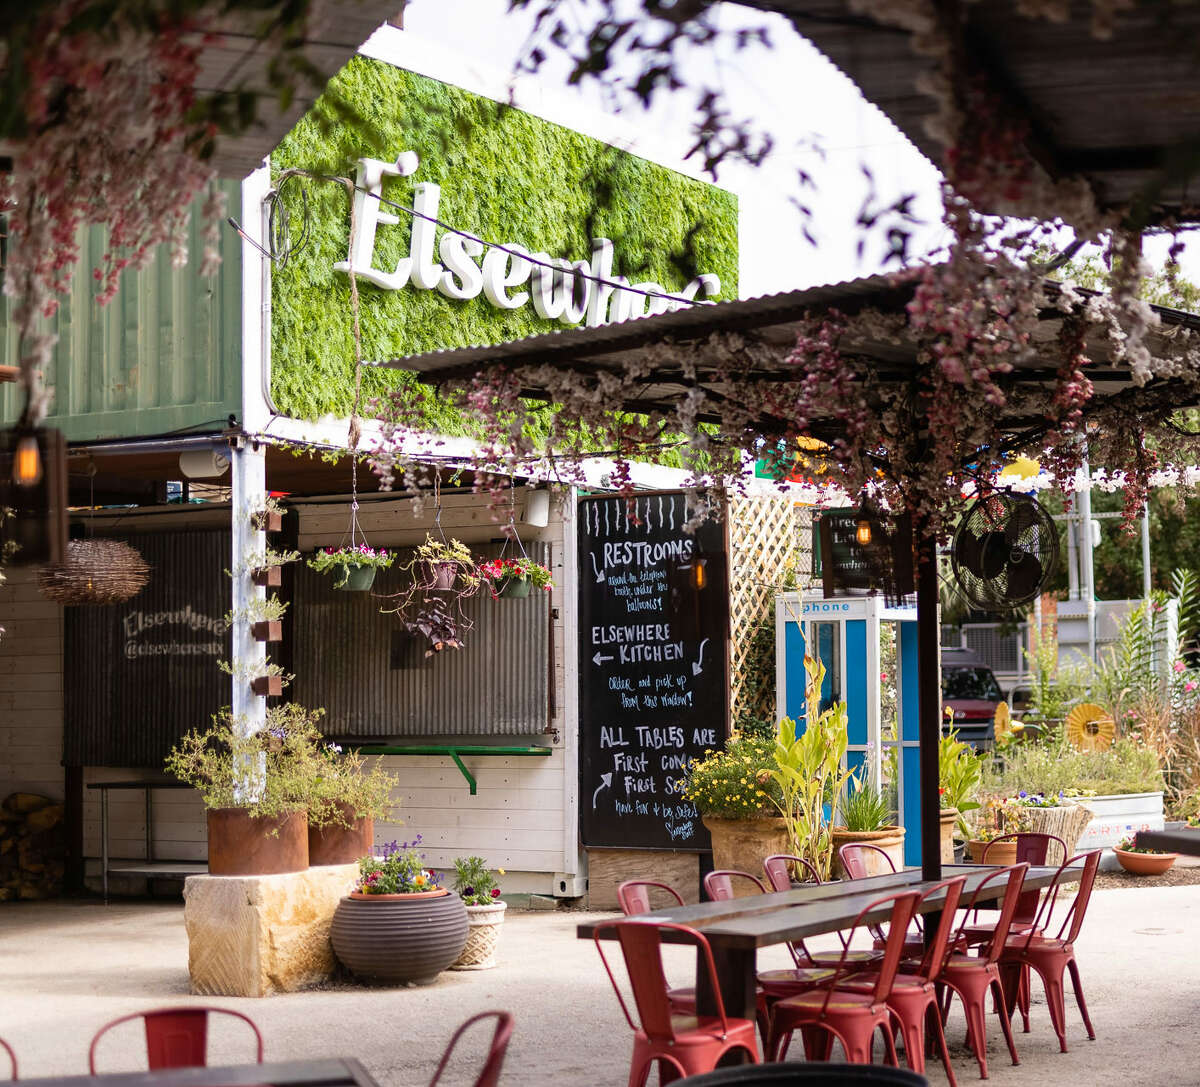 Elsewhere Garden Bar & Eatery, downtown’s popular River Walk spot on the Museum Reach, is opening a second location on San Antonio’s Northwest Side. 